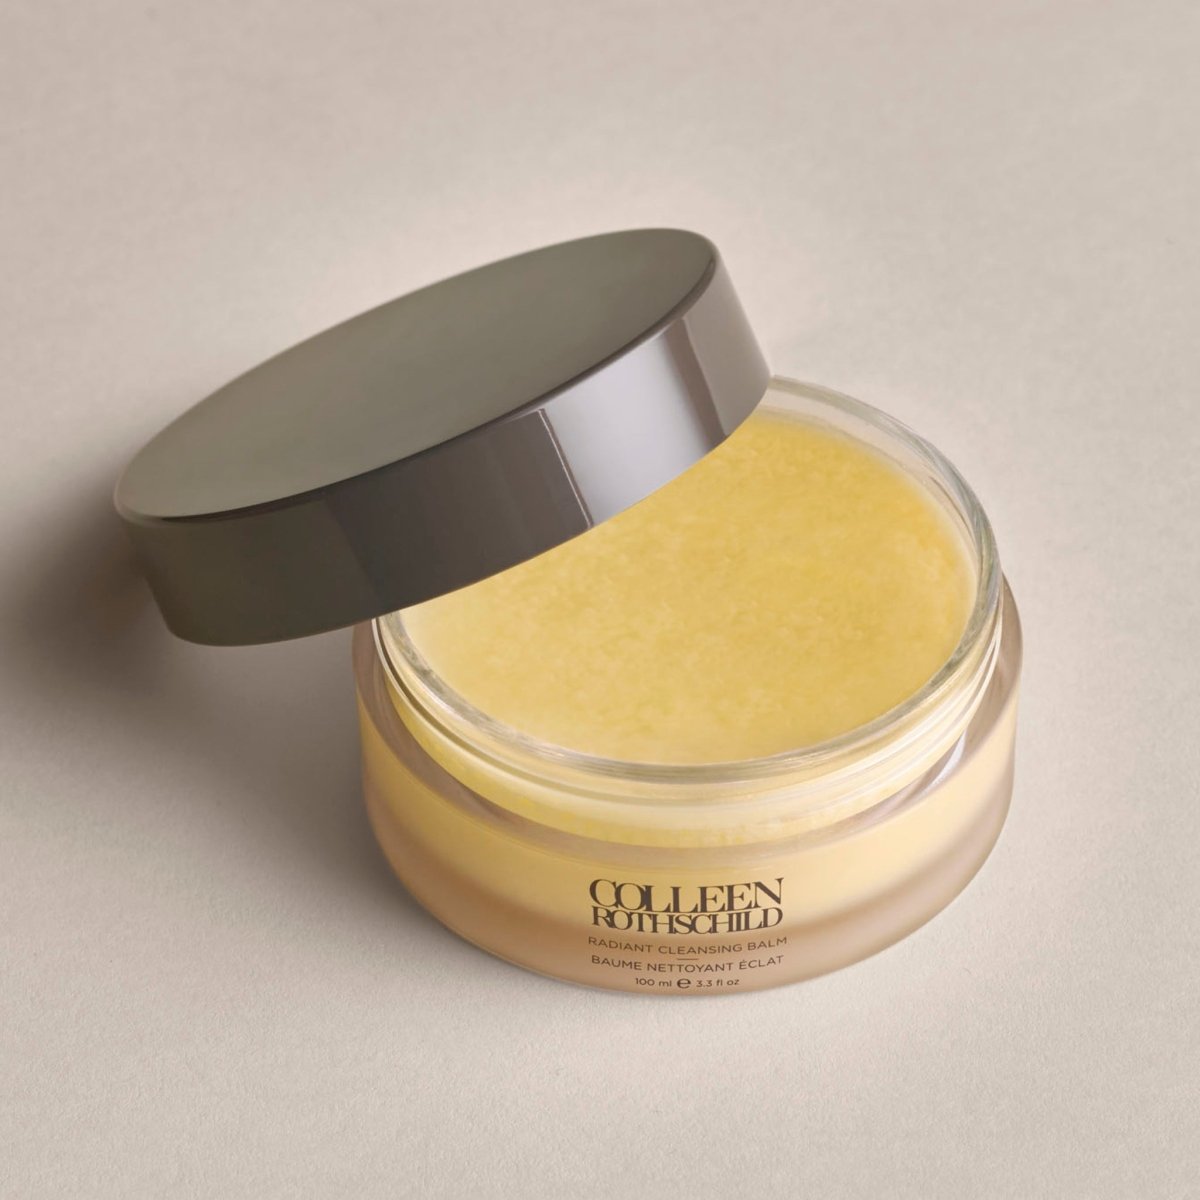 Radiant Cleansing Balm + Nomad Candle Duo - Colleen Rothschild Beauty